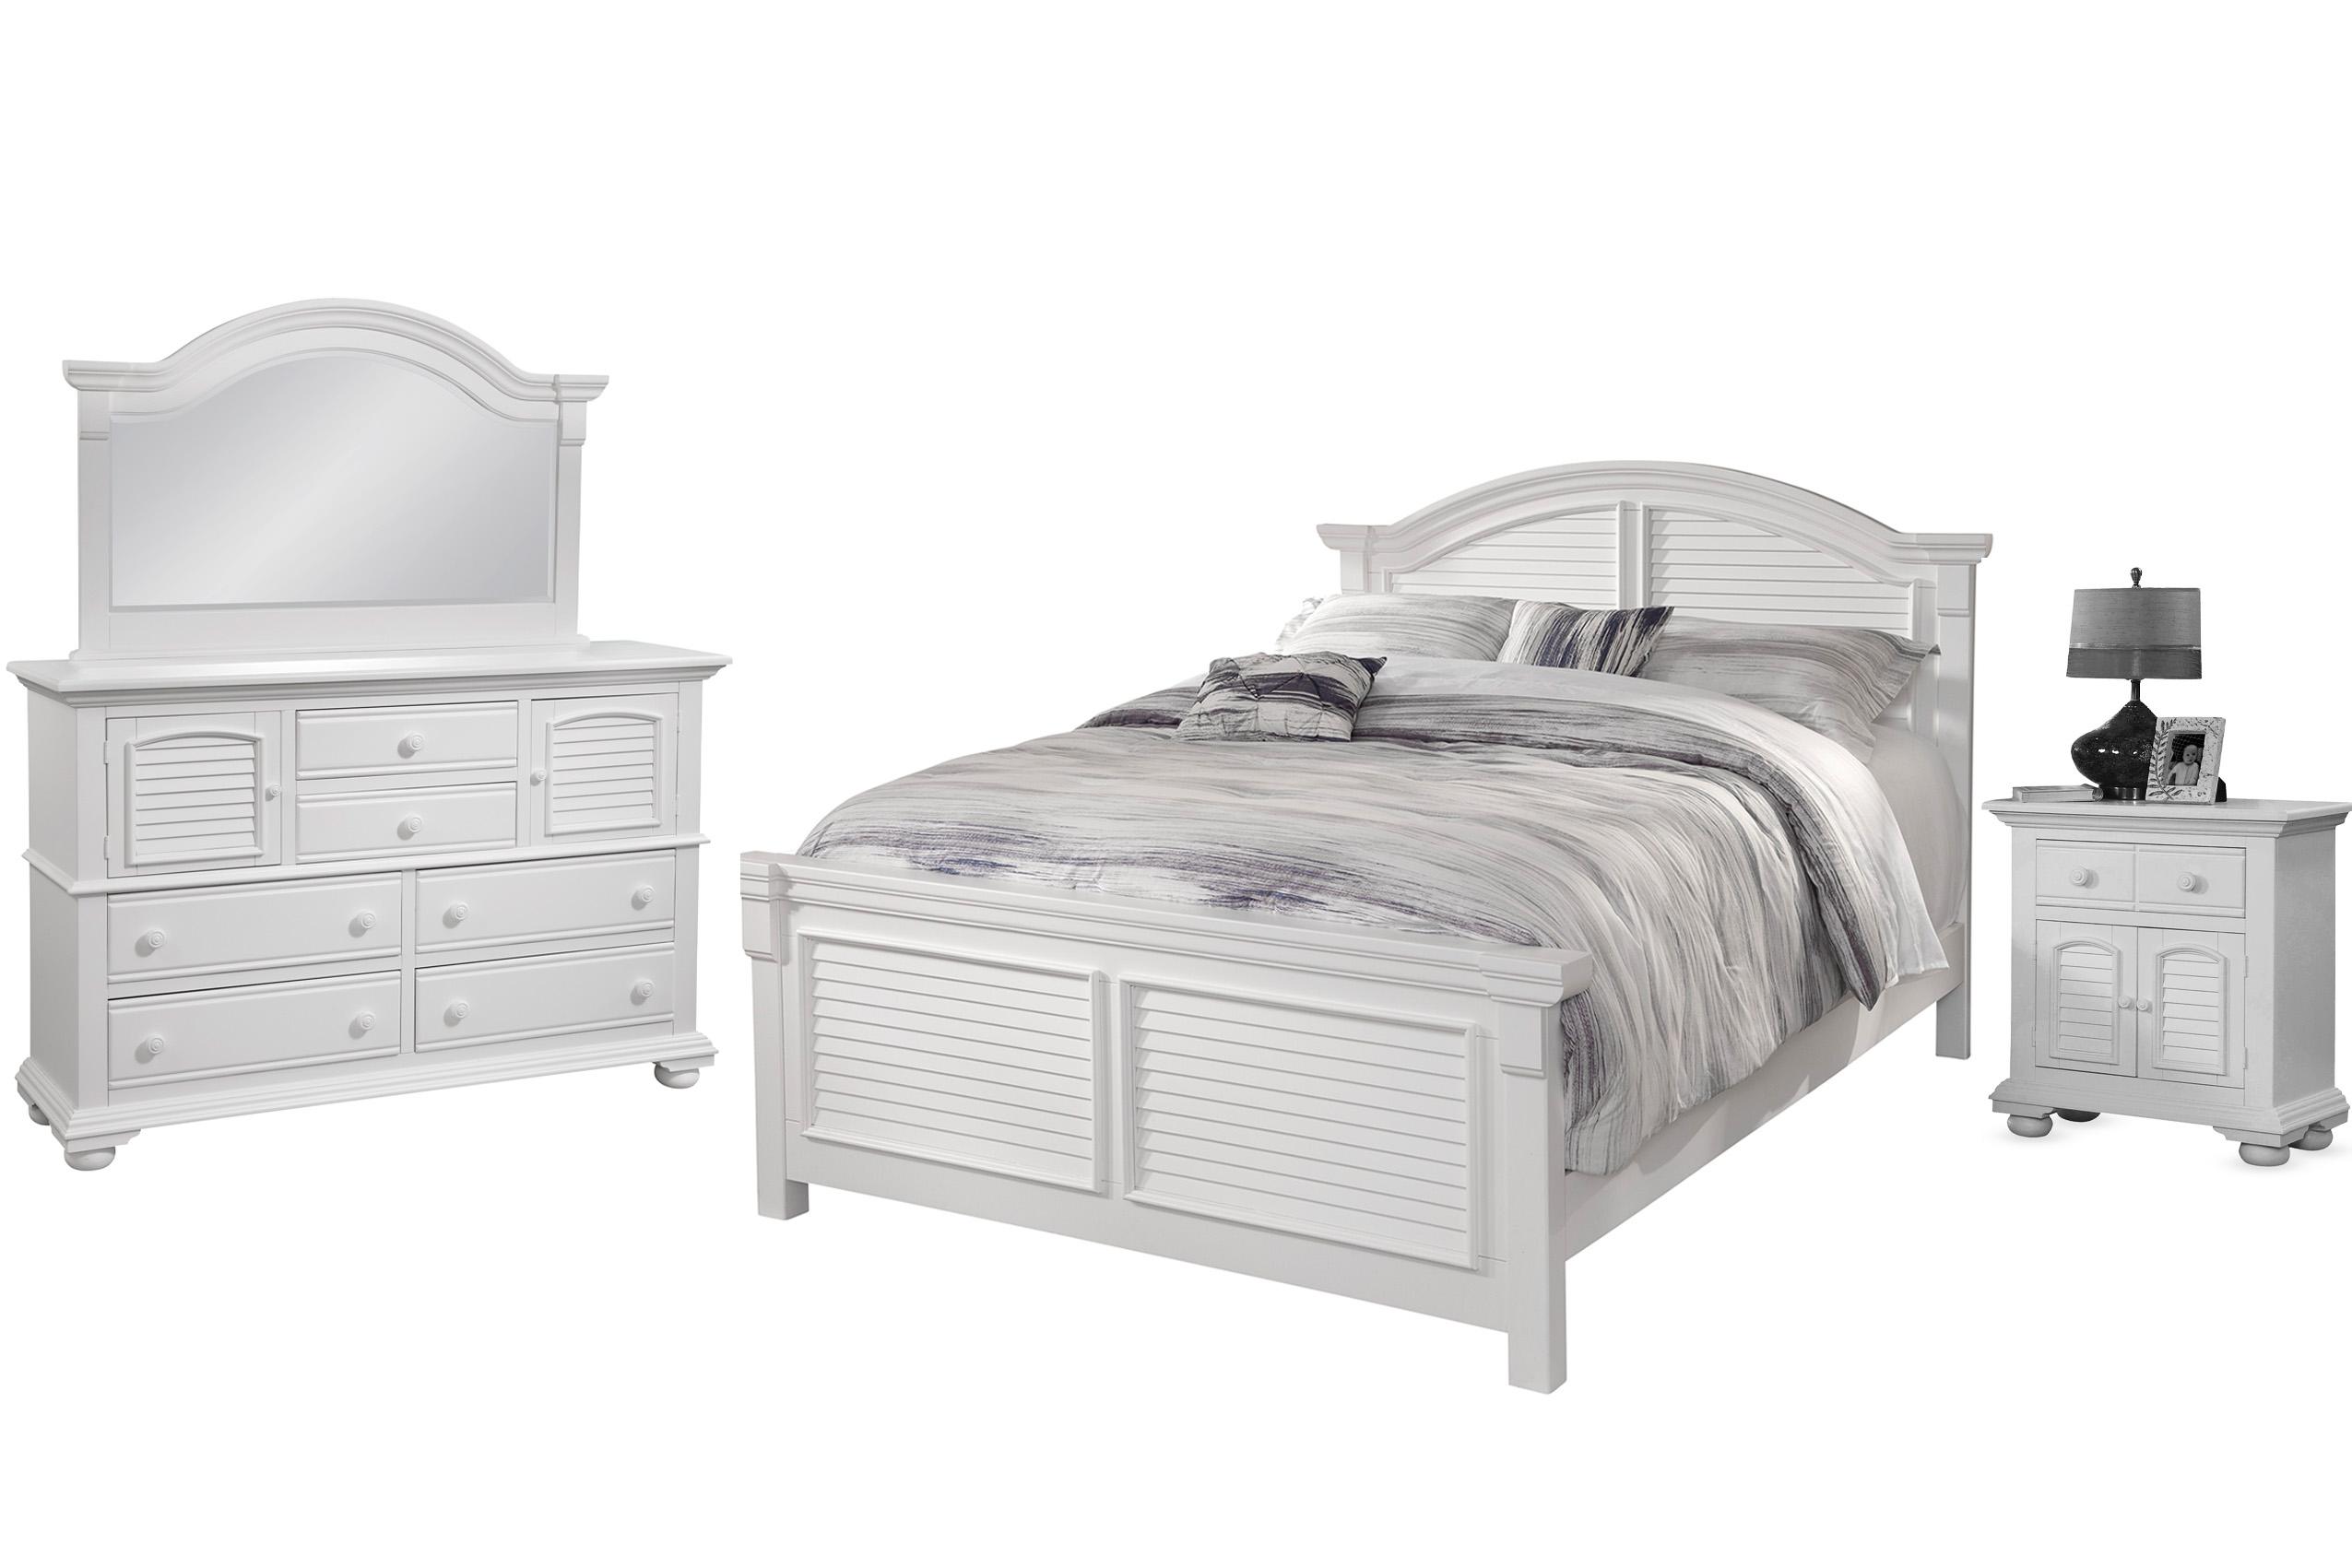 Classic, Traditional, Cottage Panel Bedroom Set COTTAGE 6510-50PAN 6510-QARPN-4PC-Big Way in White 